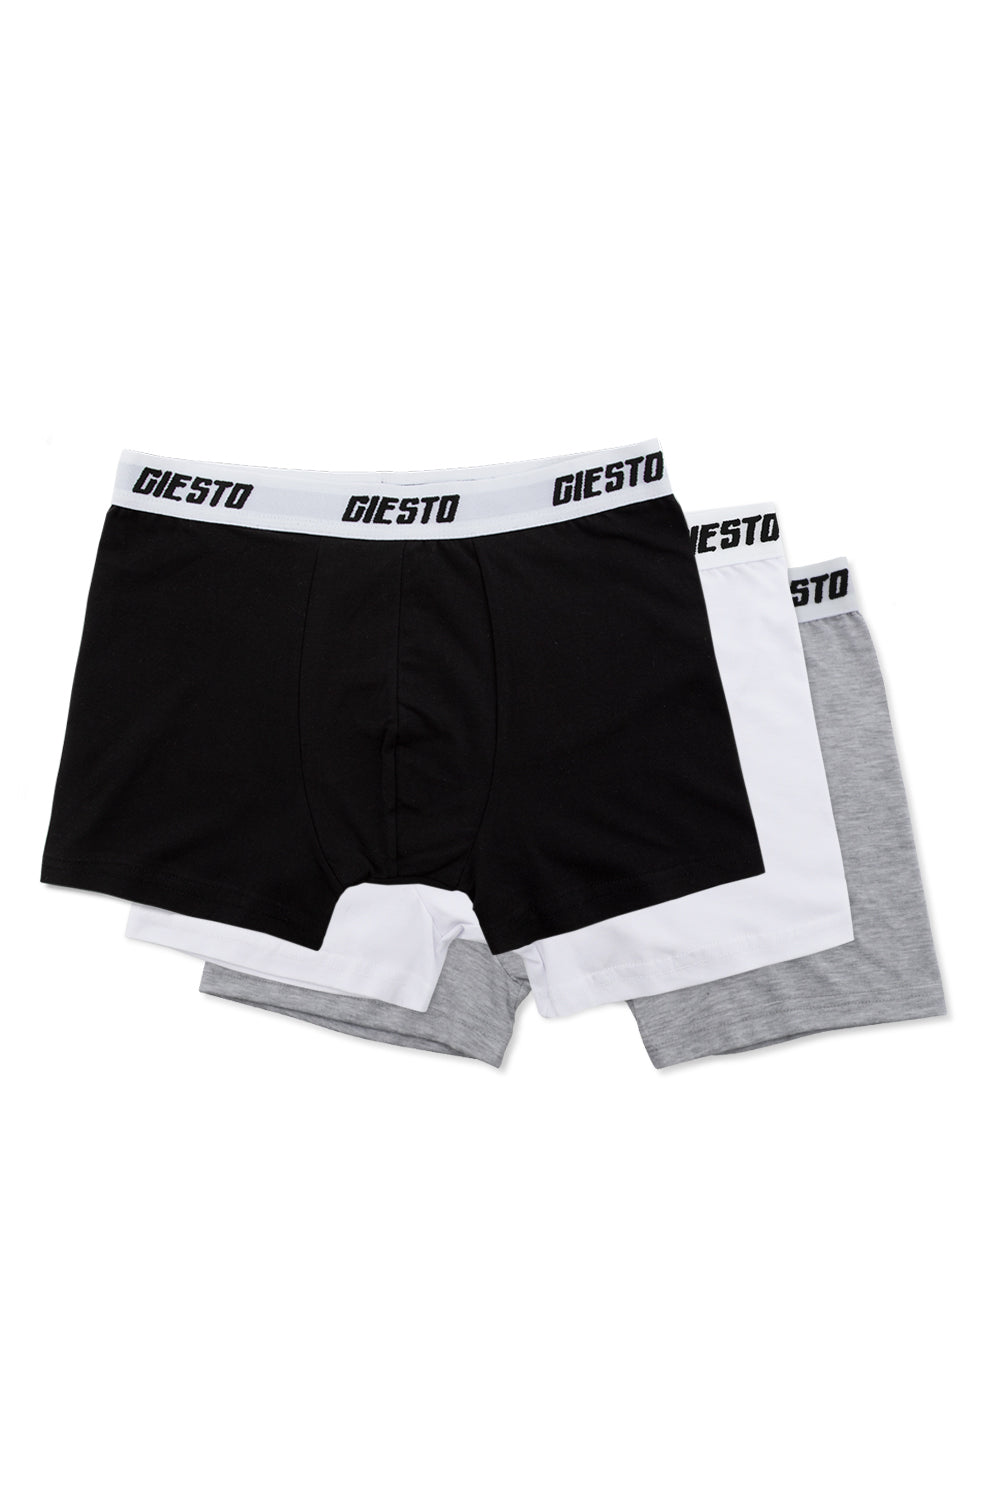 3-PIECE BASIC BOXER PACK